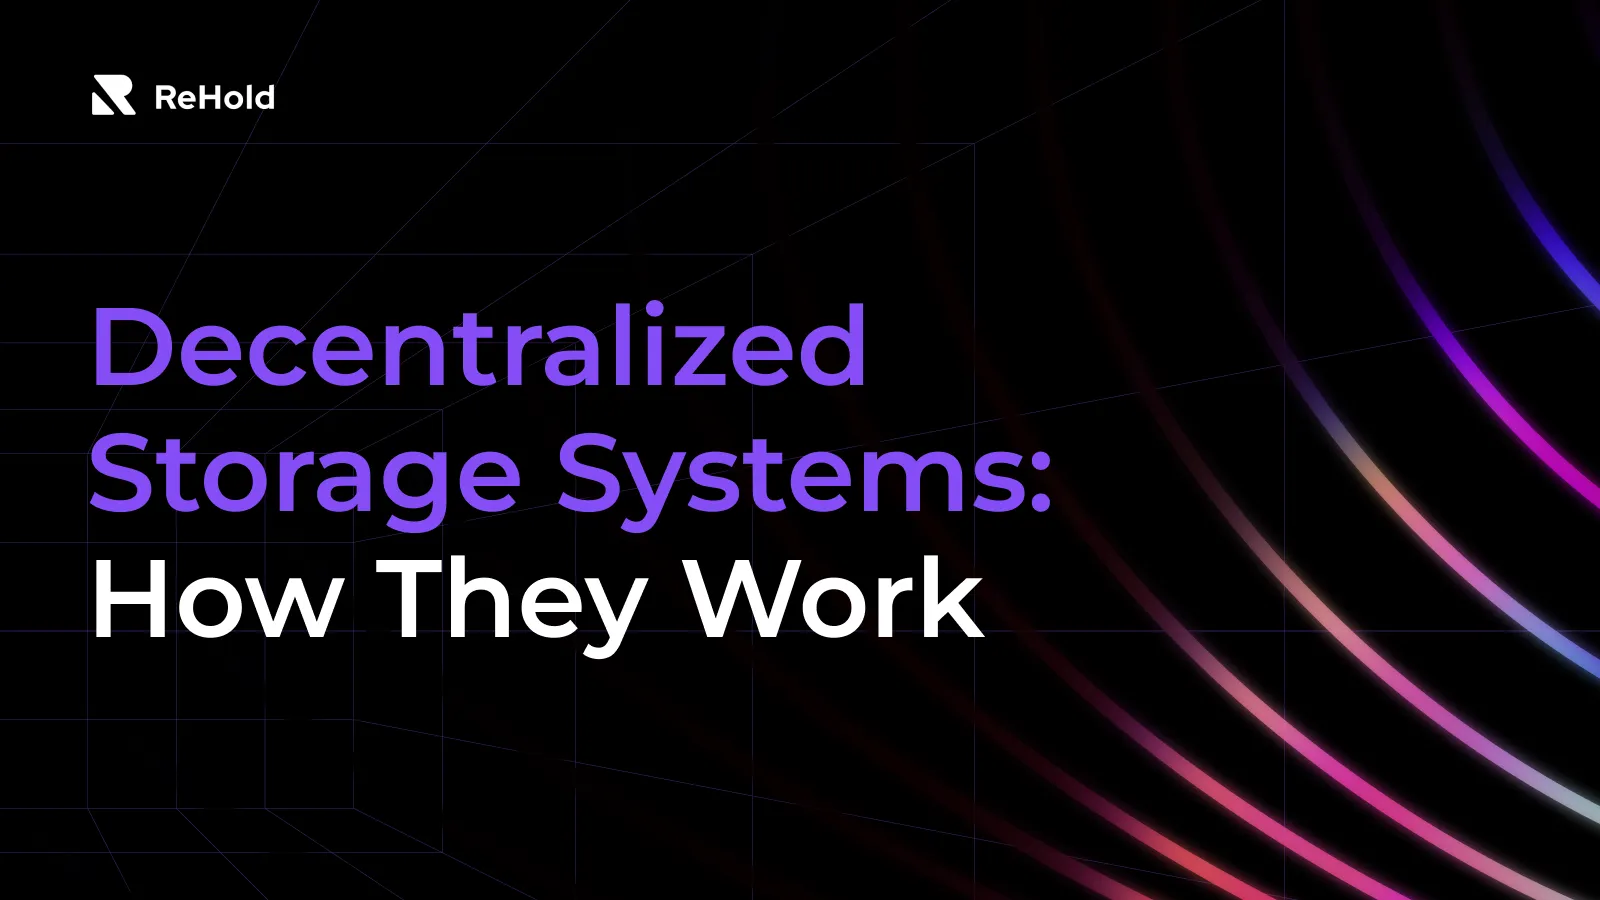 Decentralized Storage Systems and How They Work